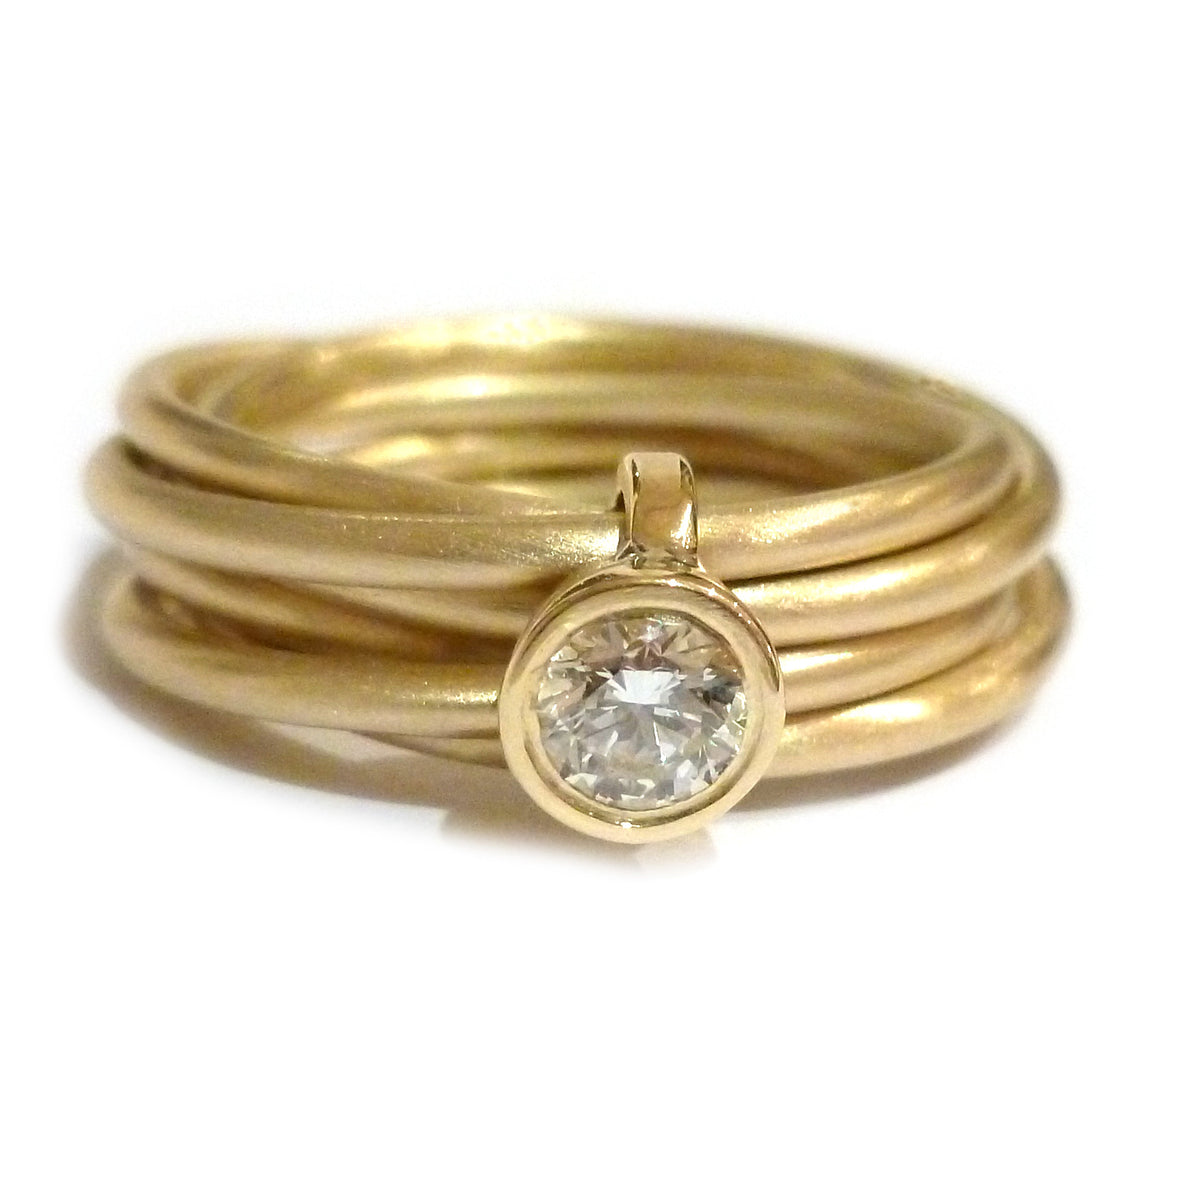 Contemporary, bespoke and modern 18k yellow gold russian style diamond wedding ring, commitment ring, eternity ring, brushed finish. Handmade by Sue Lane, UK. Unique engagement ring. Multi band ring or interlocking ring.